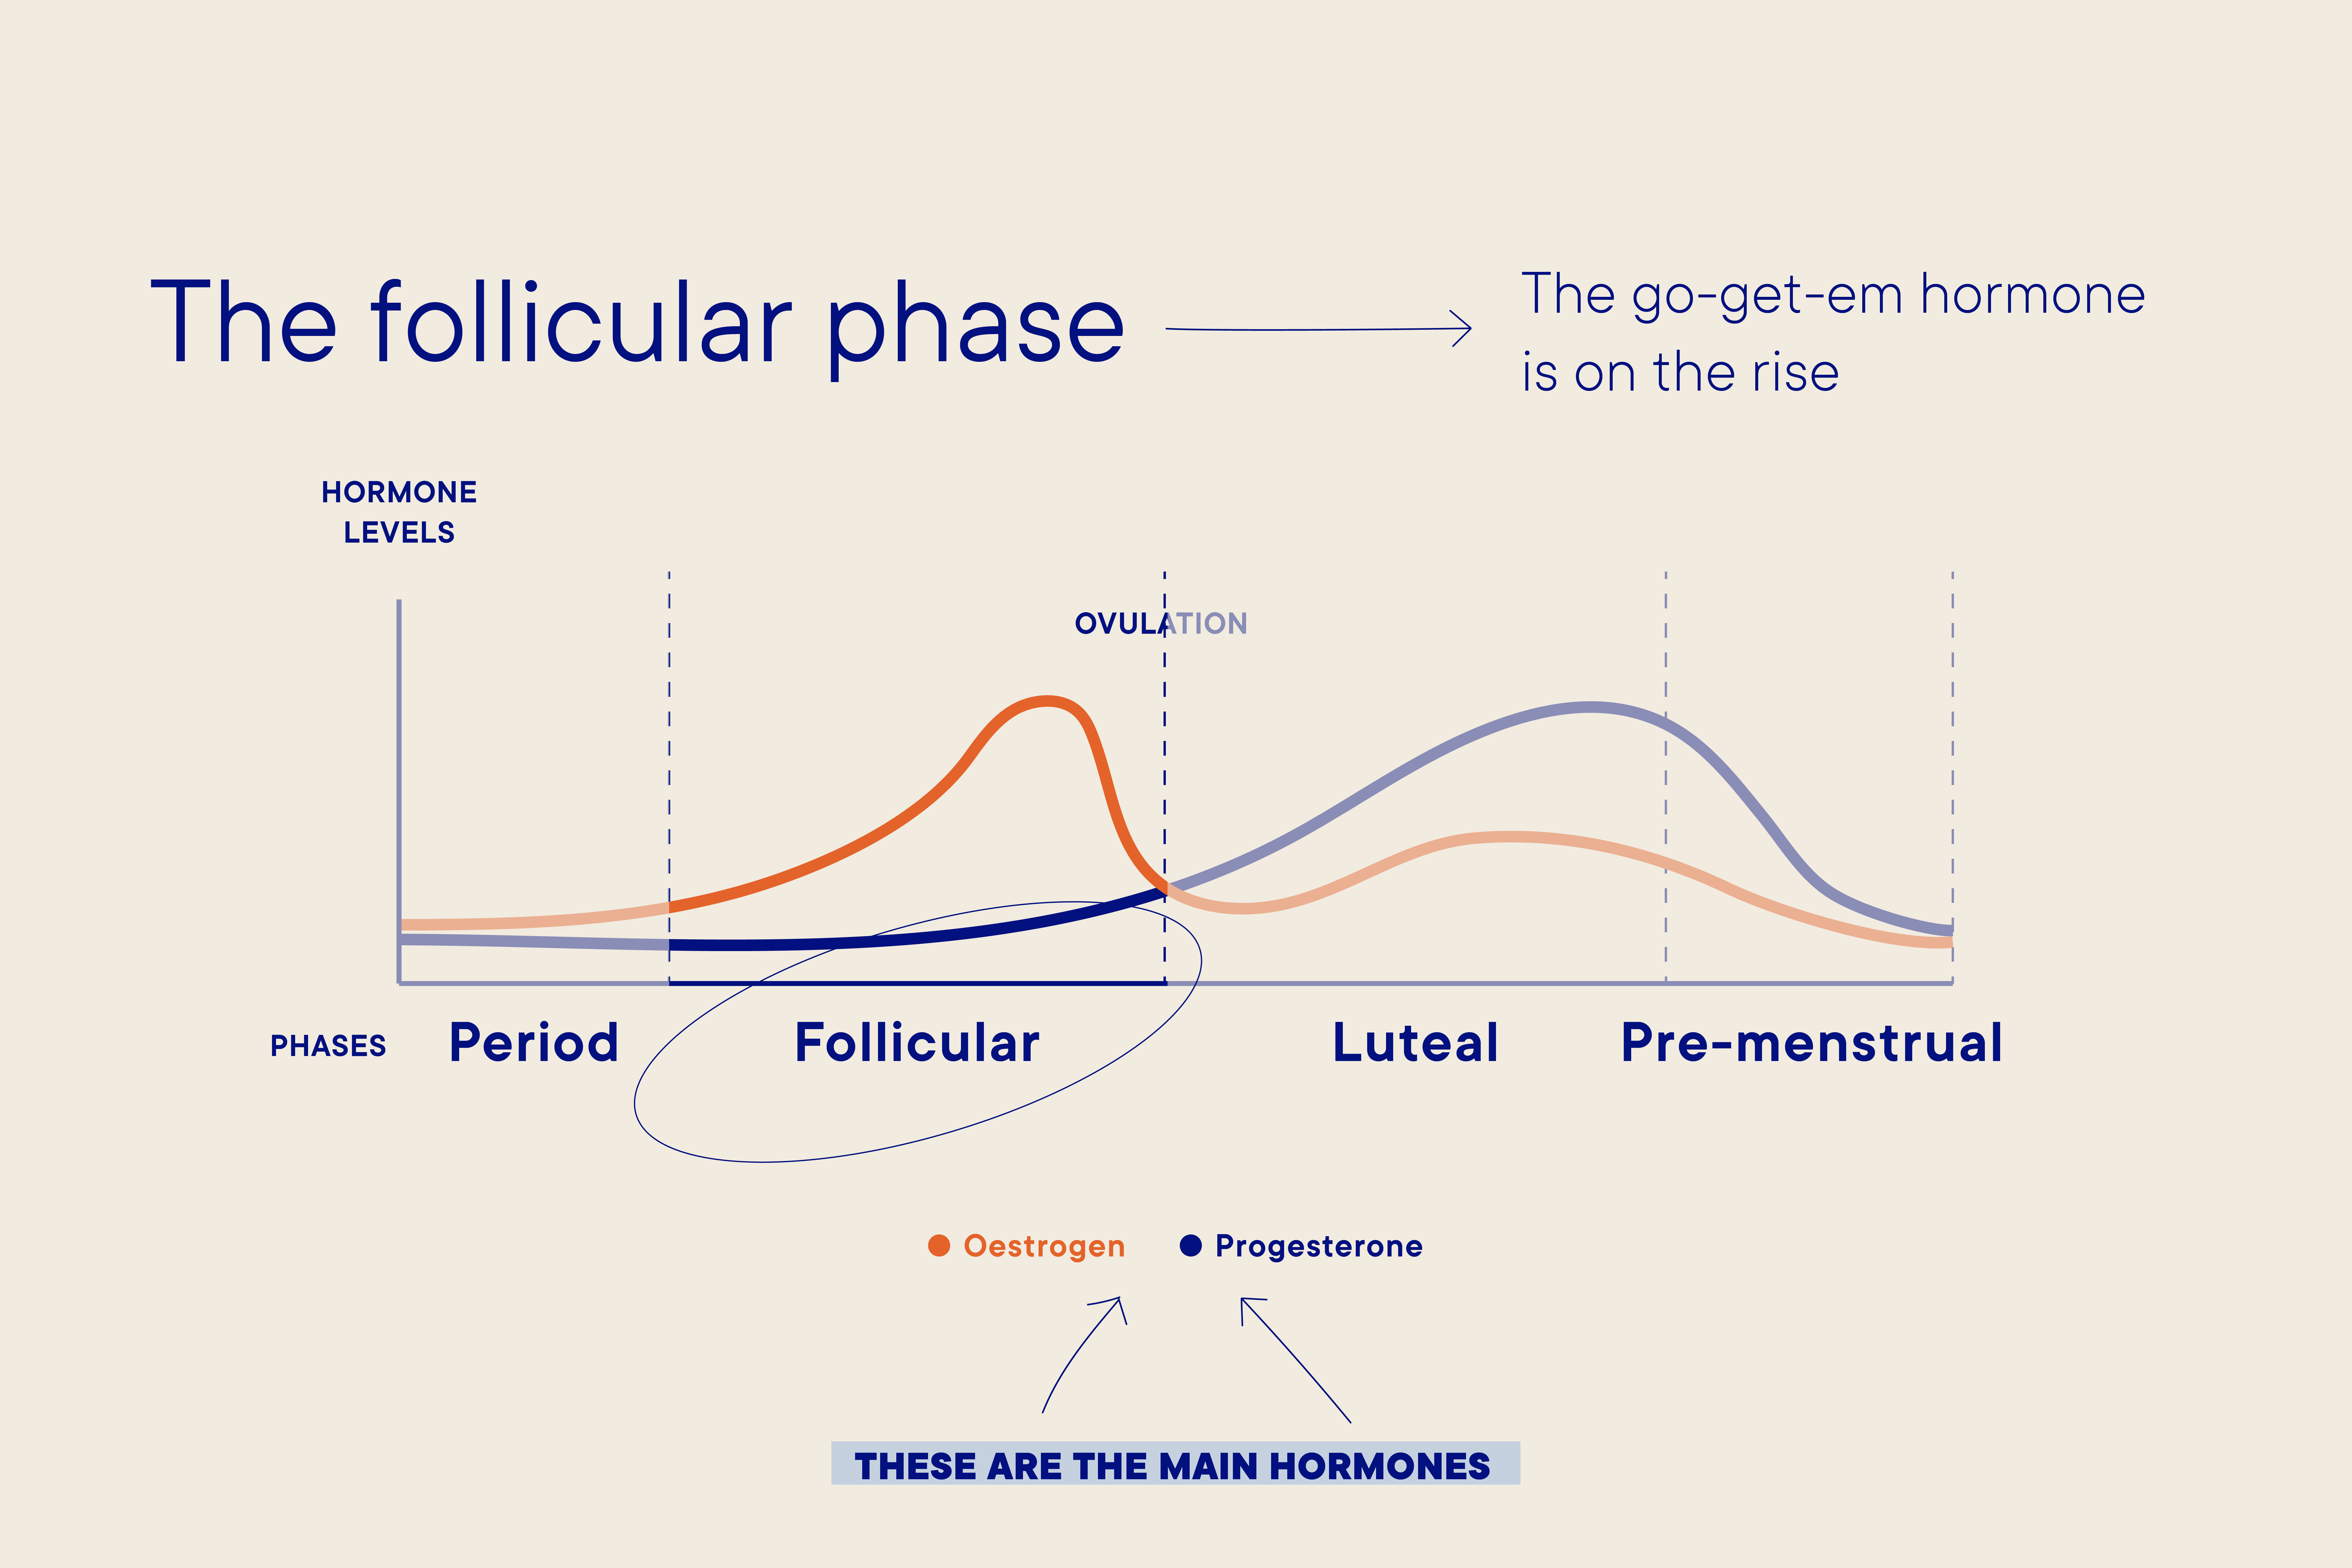 Menstrual Cycle- Phases of Menstrual Cycle and Role of Hormones